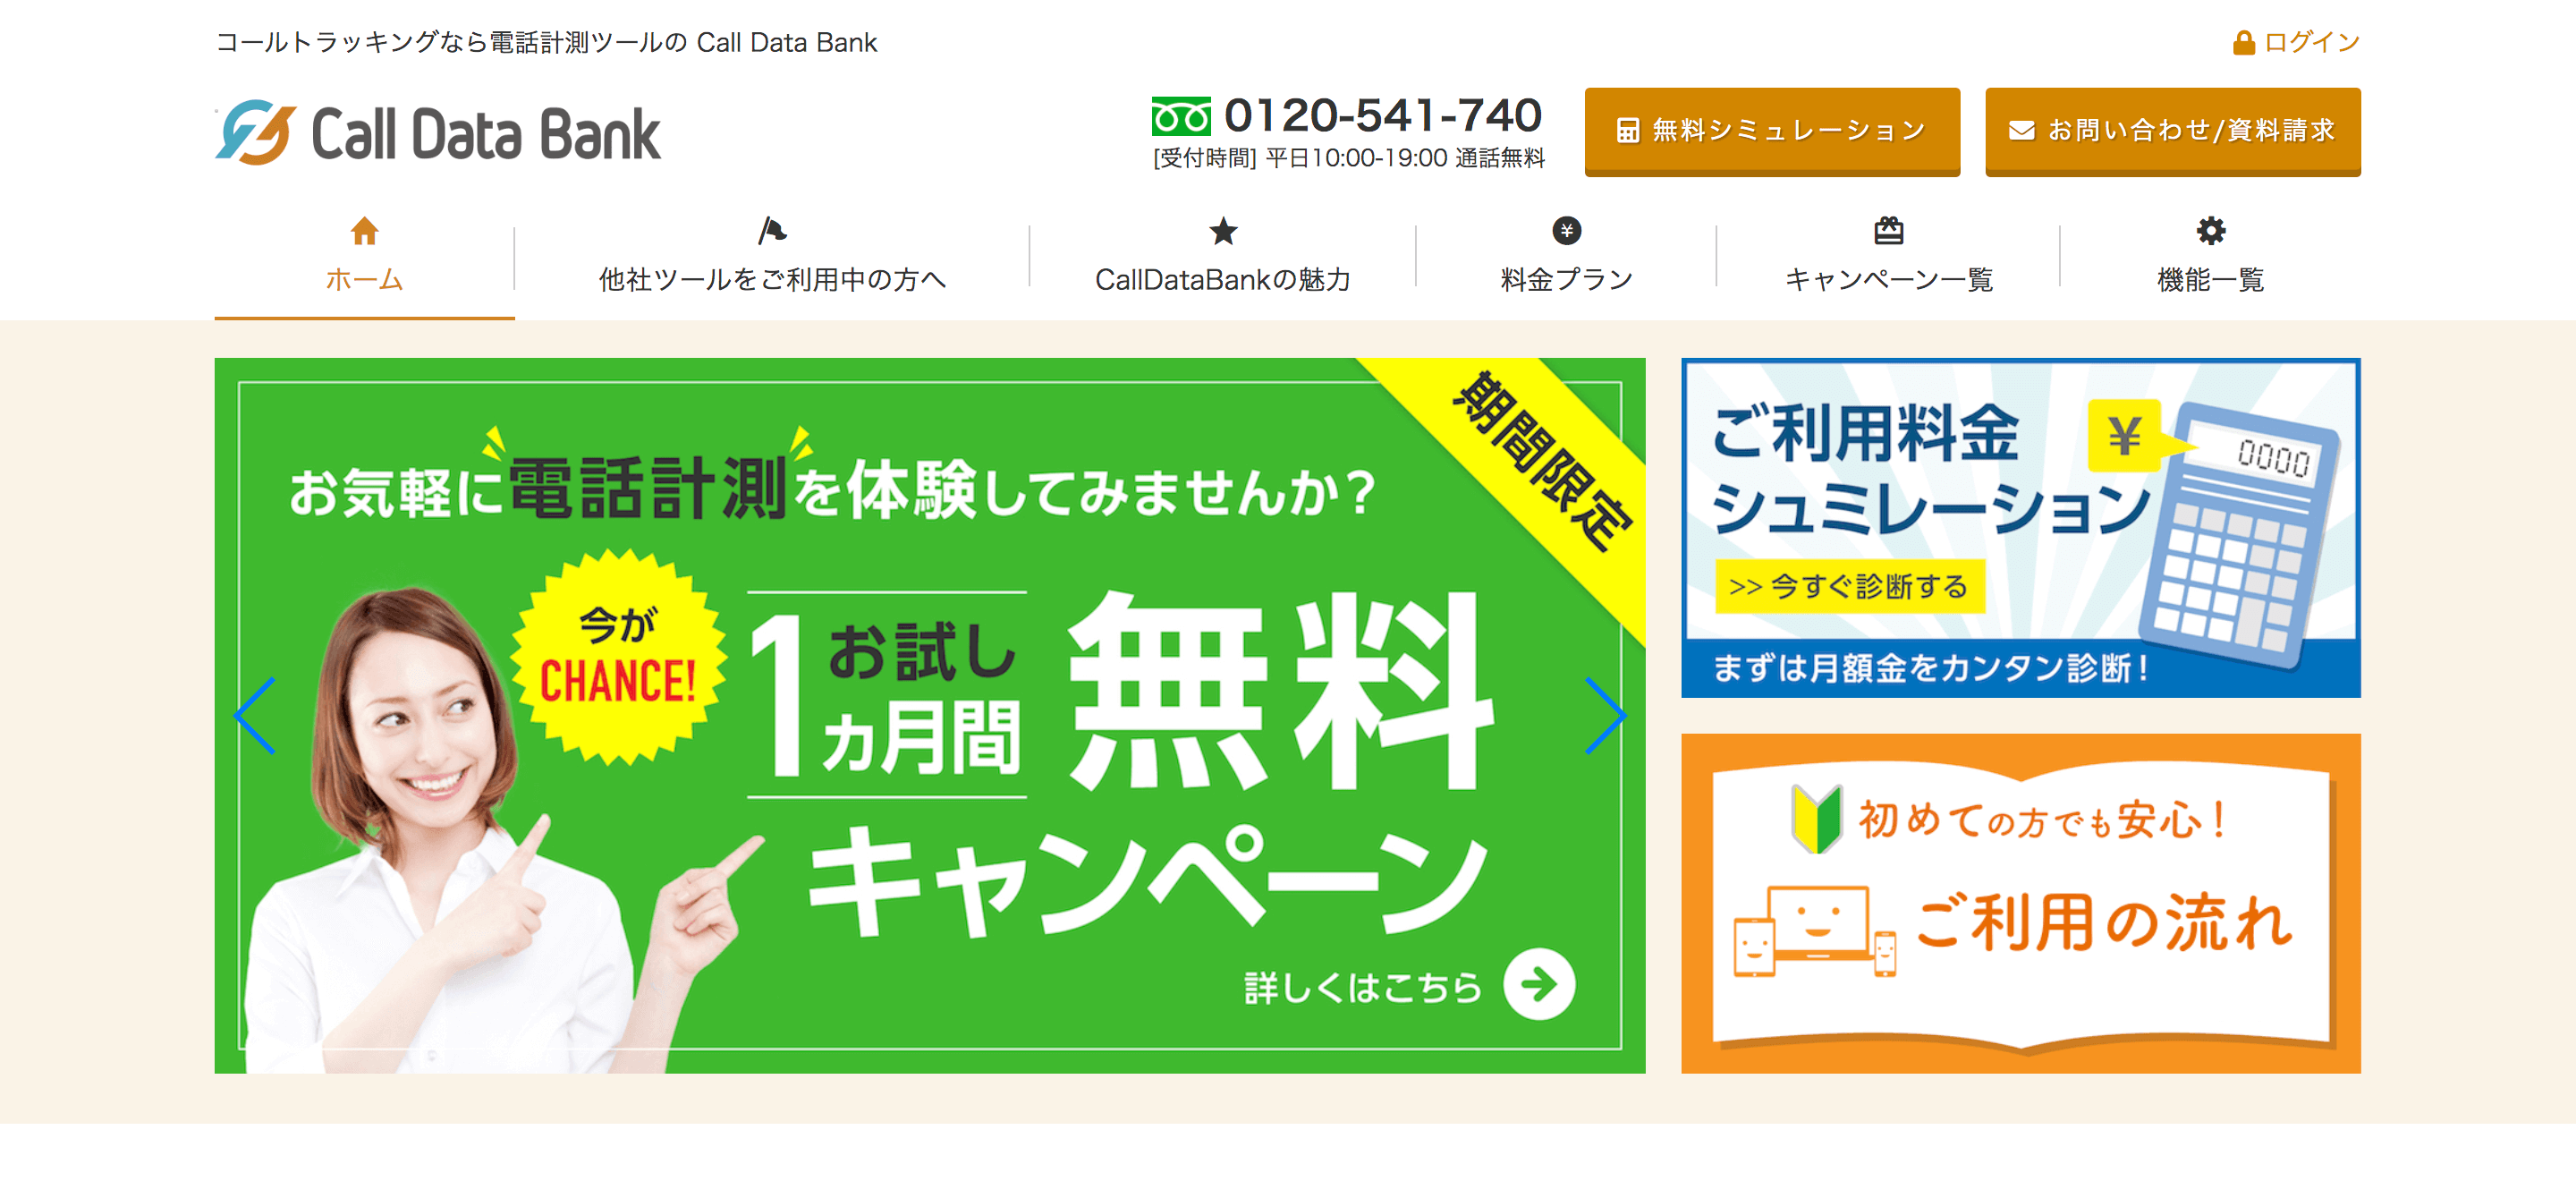 Call Date Bankのサイト画面